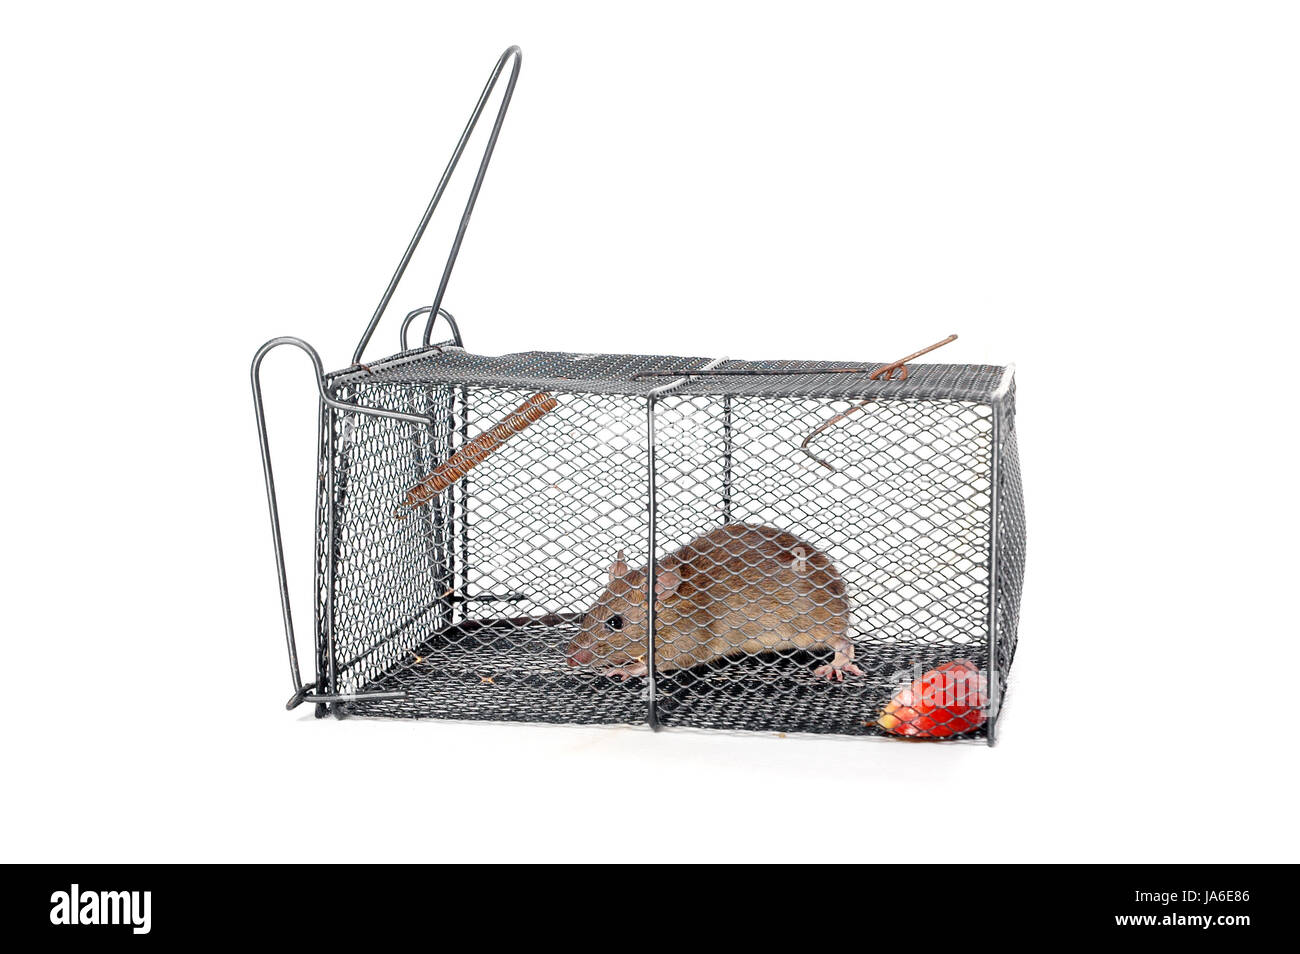 Mousetrap with bait stock image. Image of catch, isolated - 23664009